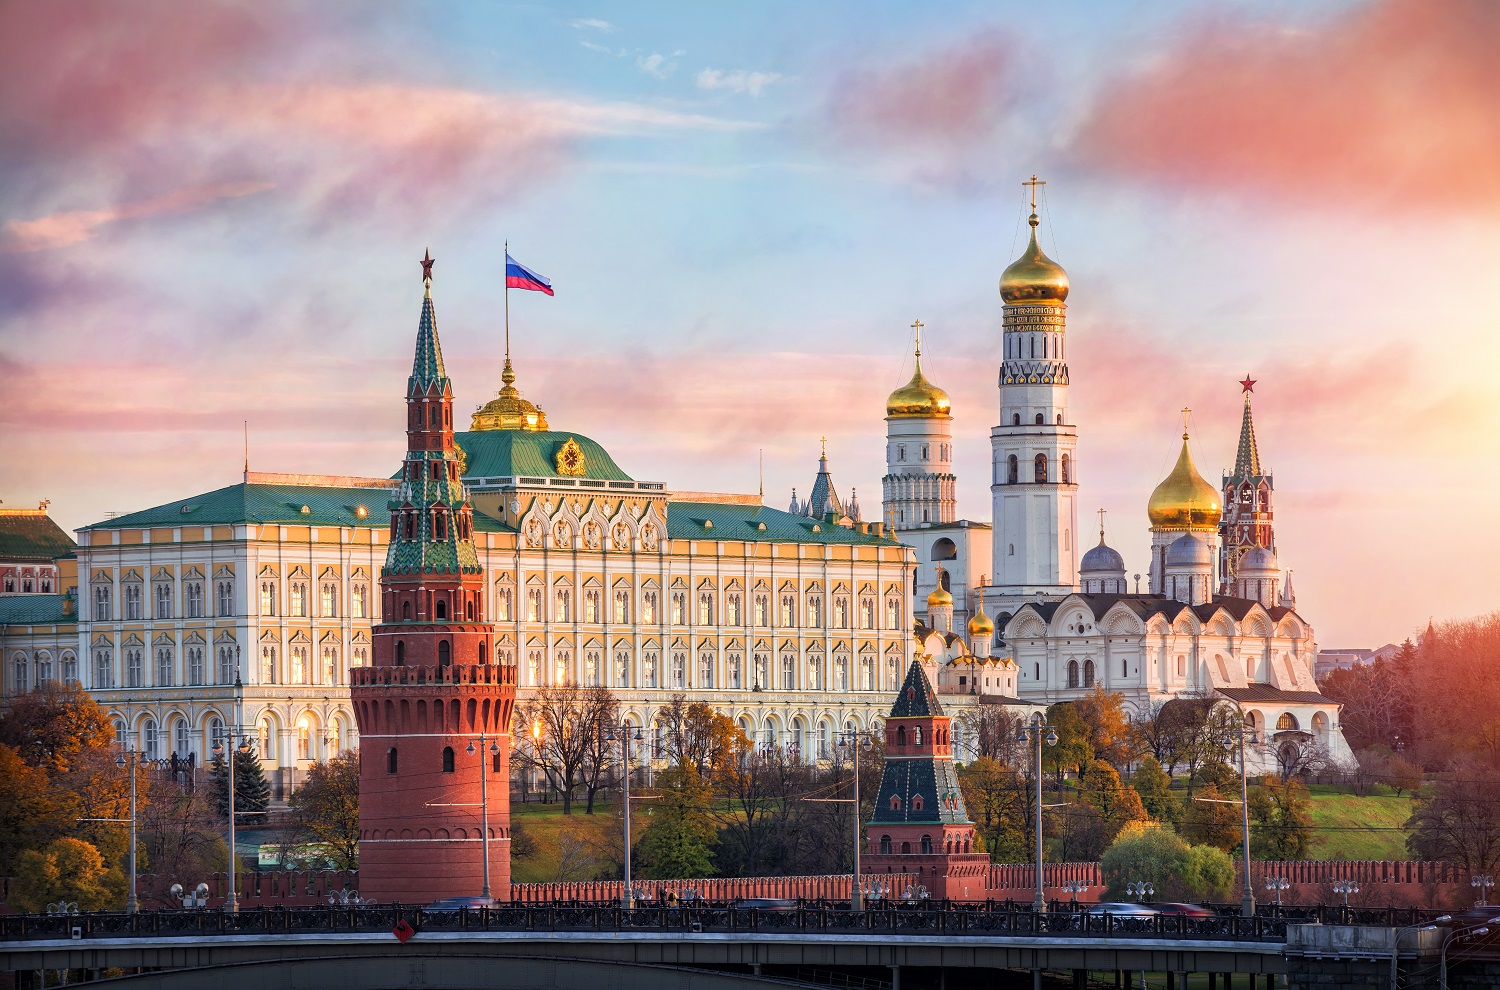 The Kremlin, in Moscow, Russia.